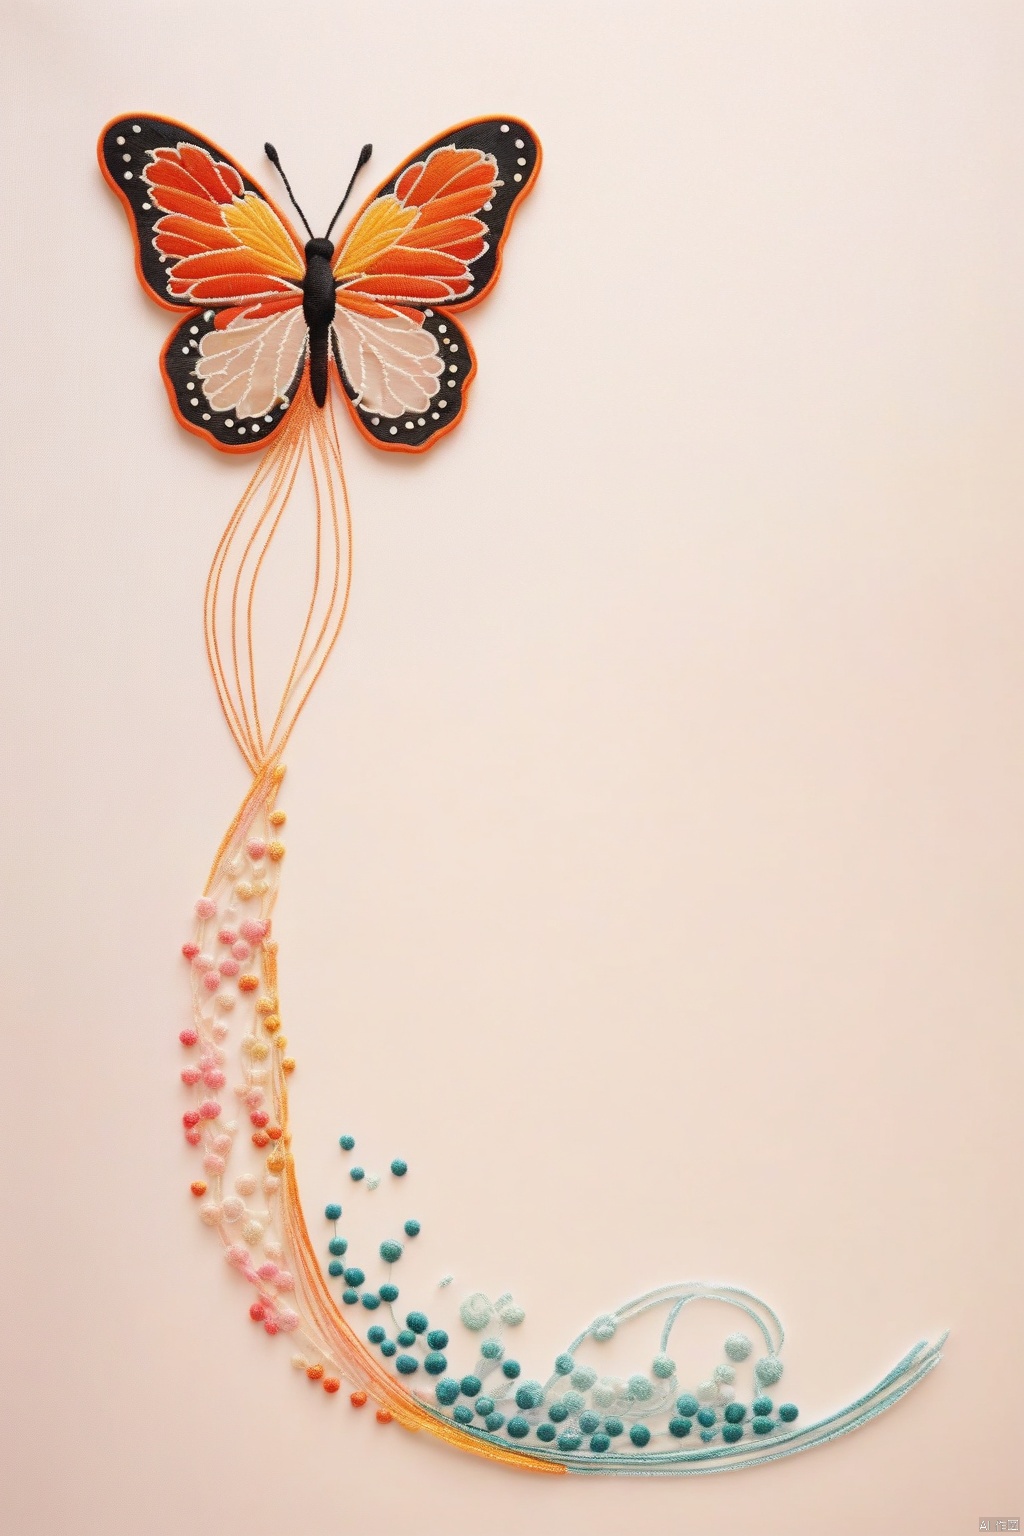 Butterfly dotted with water, streamer art, minimalist design, silk transparent embroidery style,